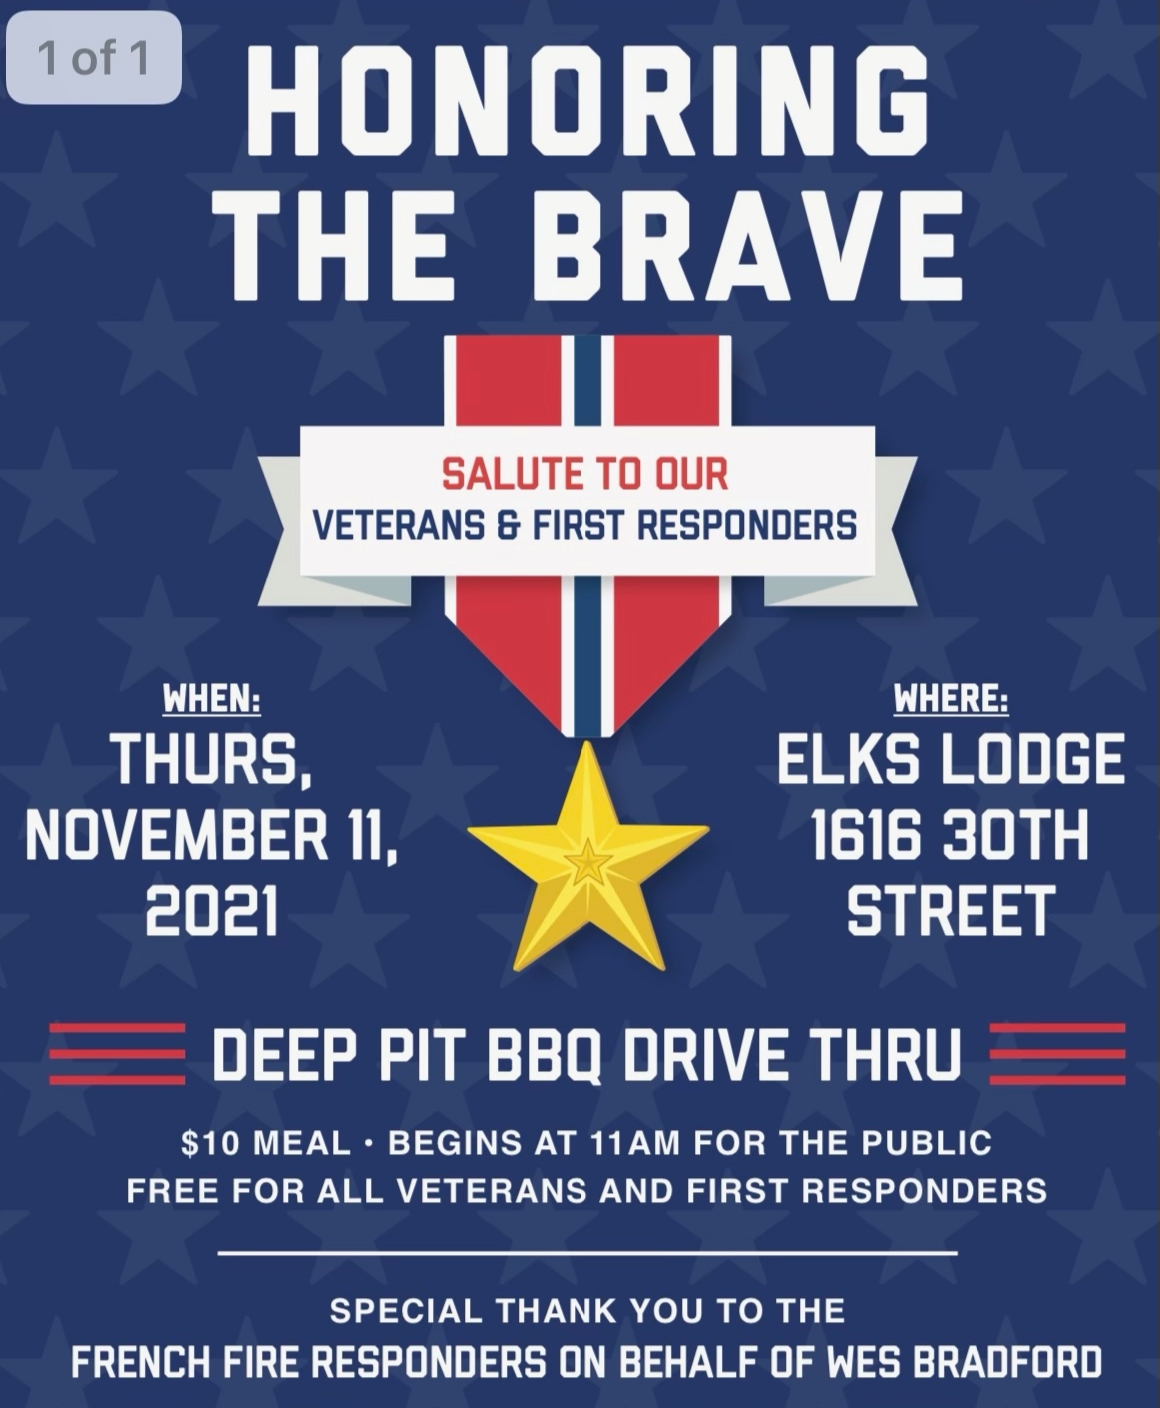 Kevin Burton & Paul Sturgeon Promote BBQ To Support Vets & First Responders